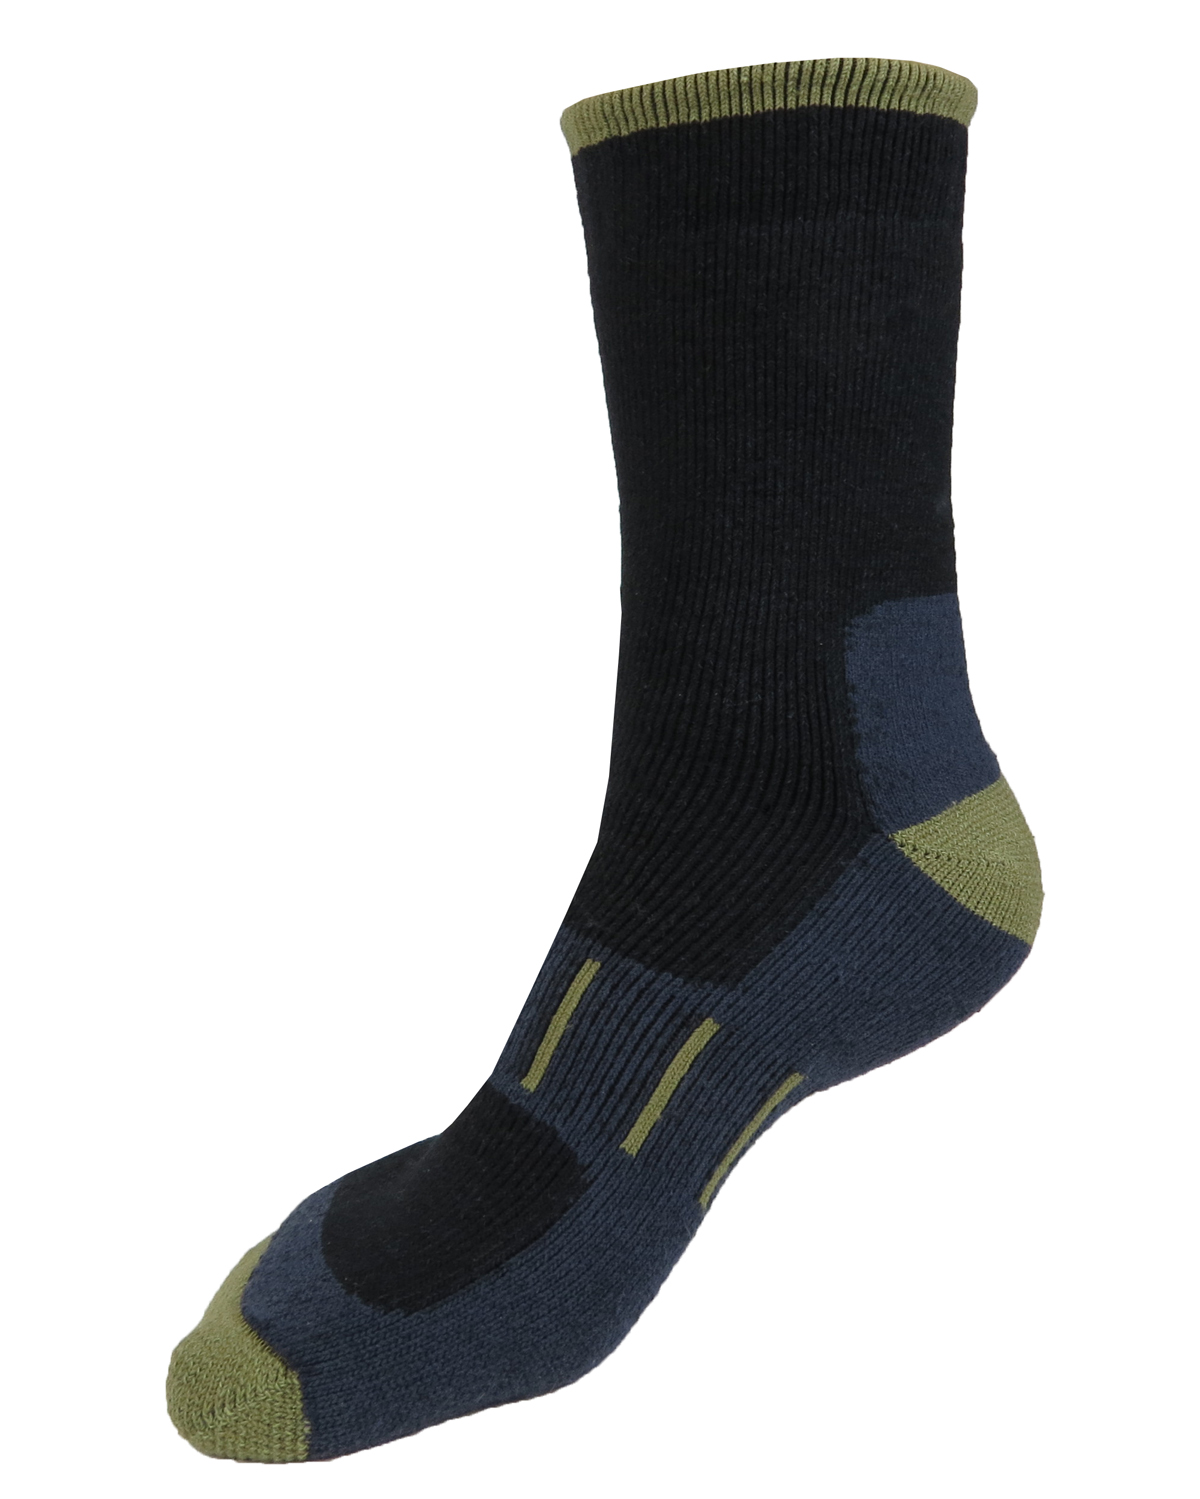 11 Best Hiking Socks In 2022: Comfy, Cushioned, And, 45% OFF